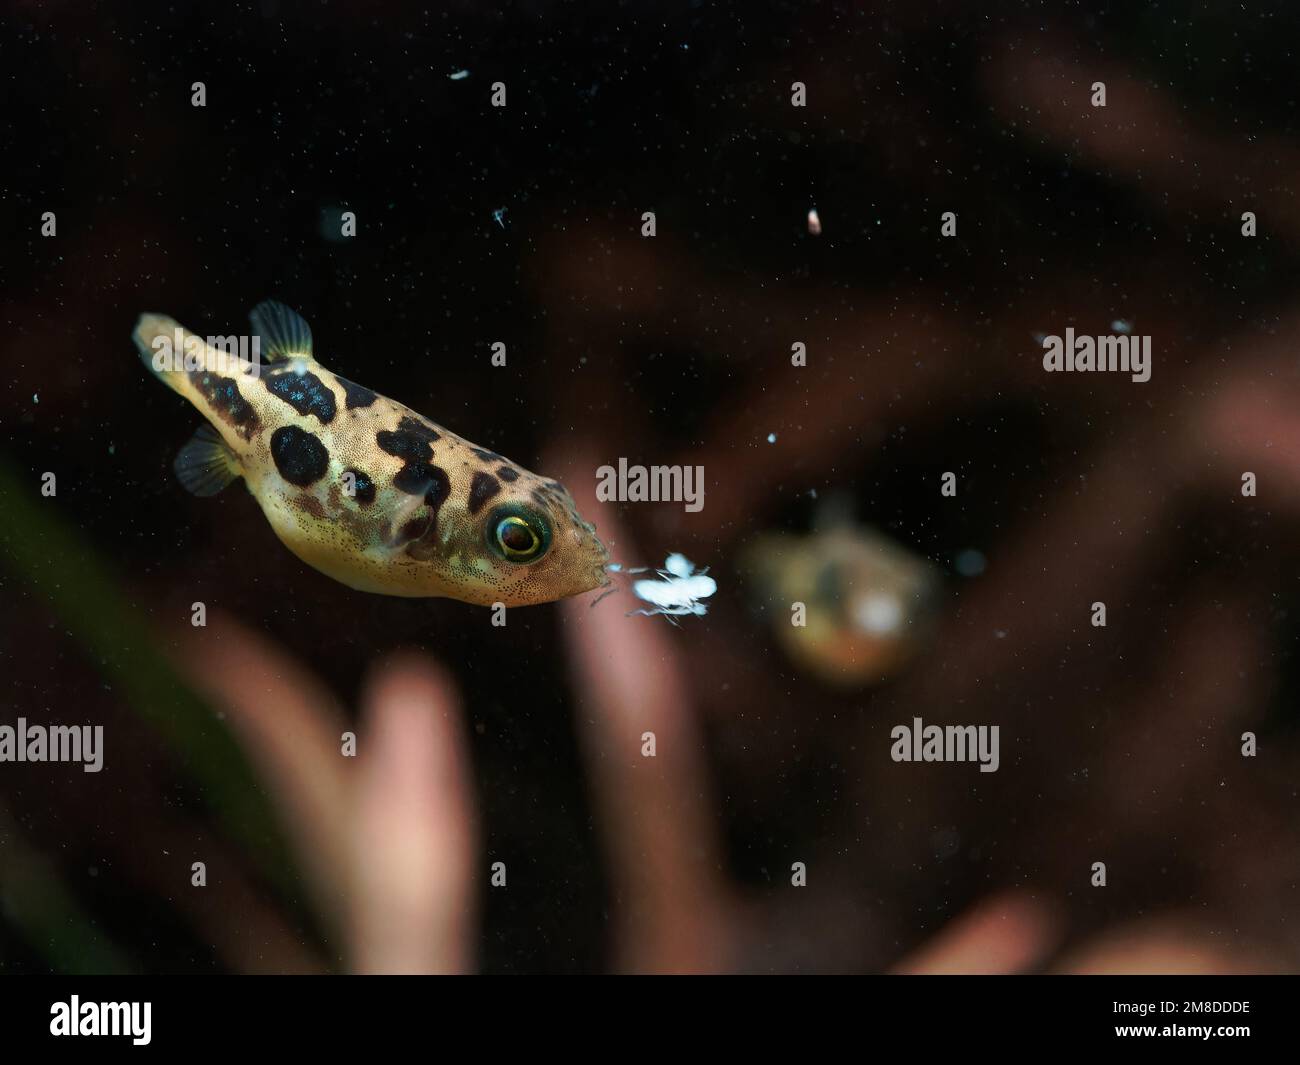 Dwarf pea puffer (Carinotetraodon travancoricus) about to swallow mysis shrimp during feeding while another fish watches Stock Photo